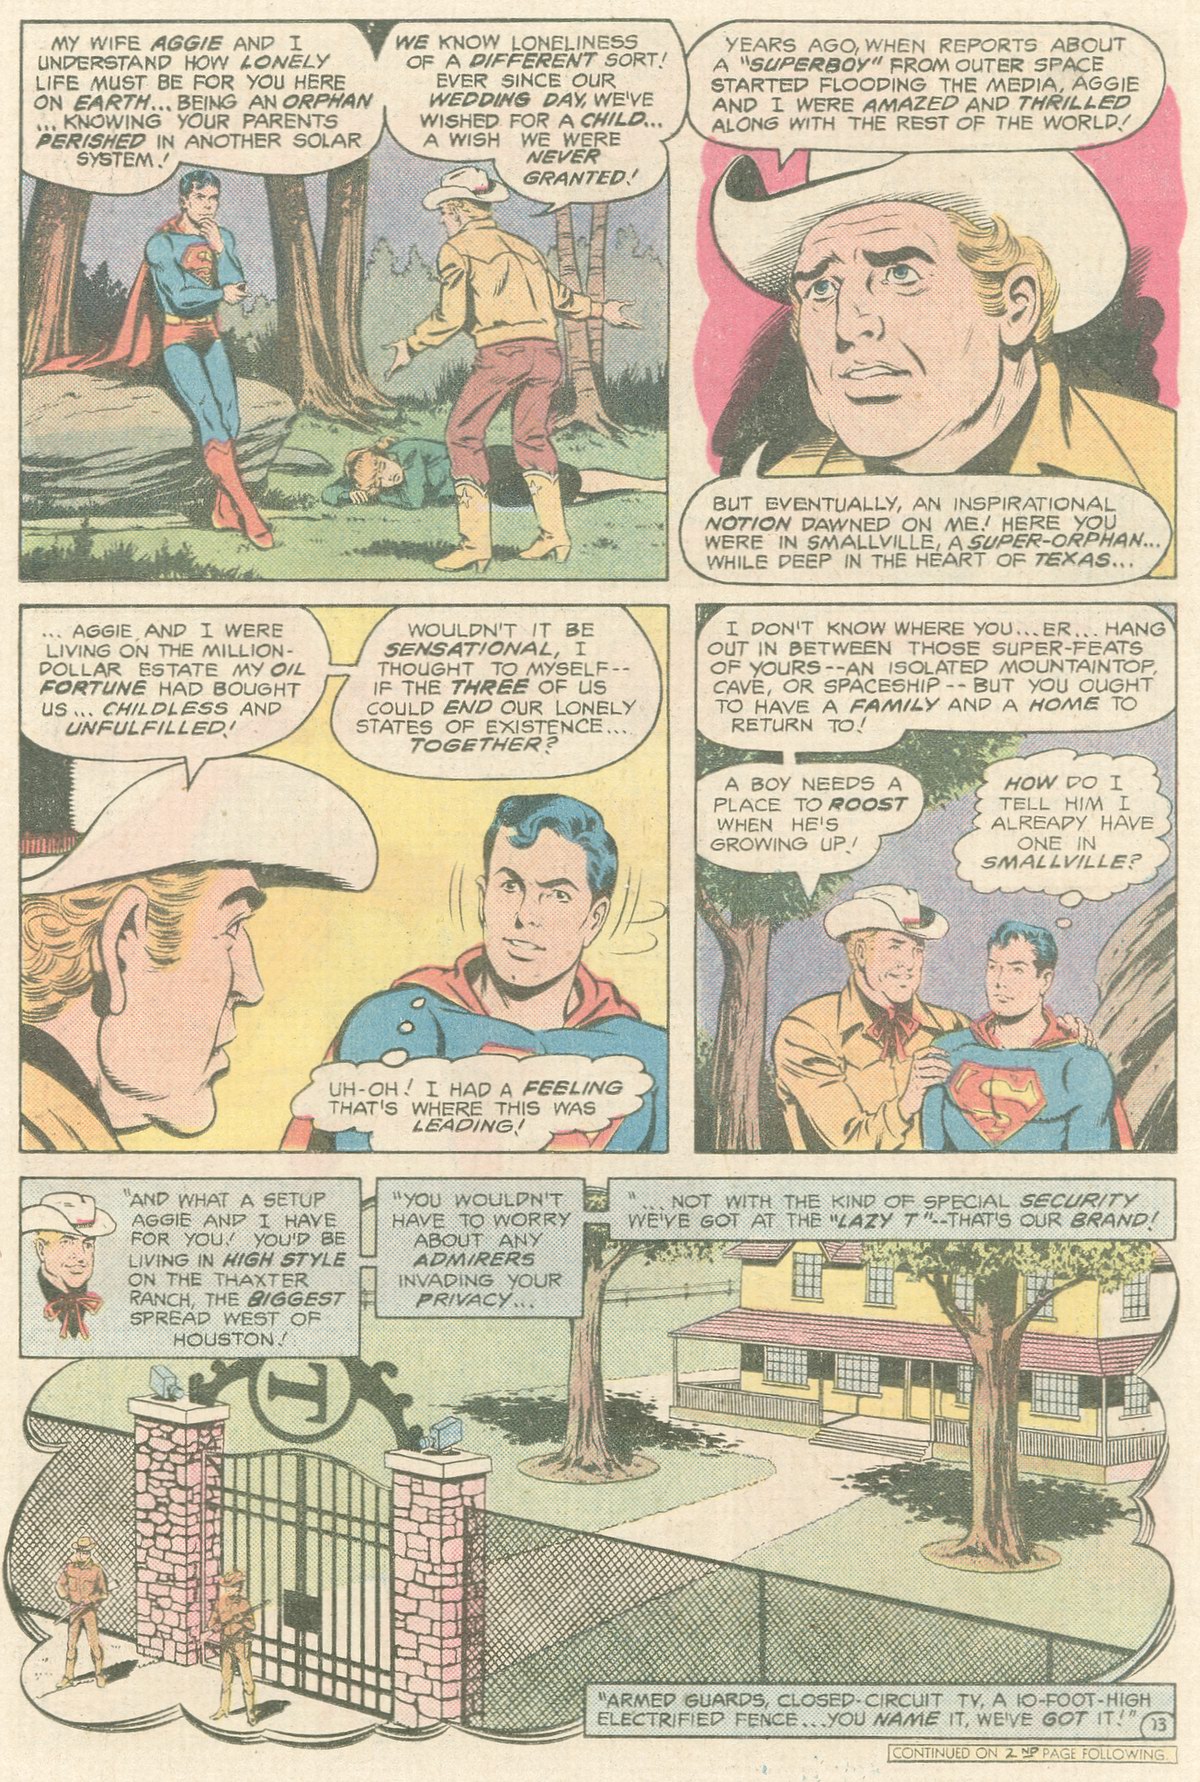 The New Adventures of Superboy 15 Page 13